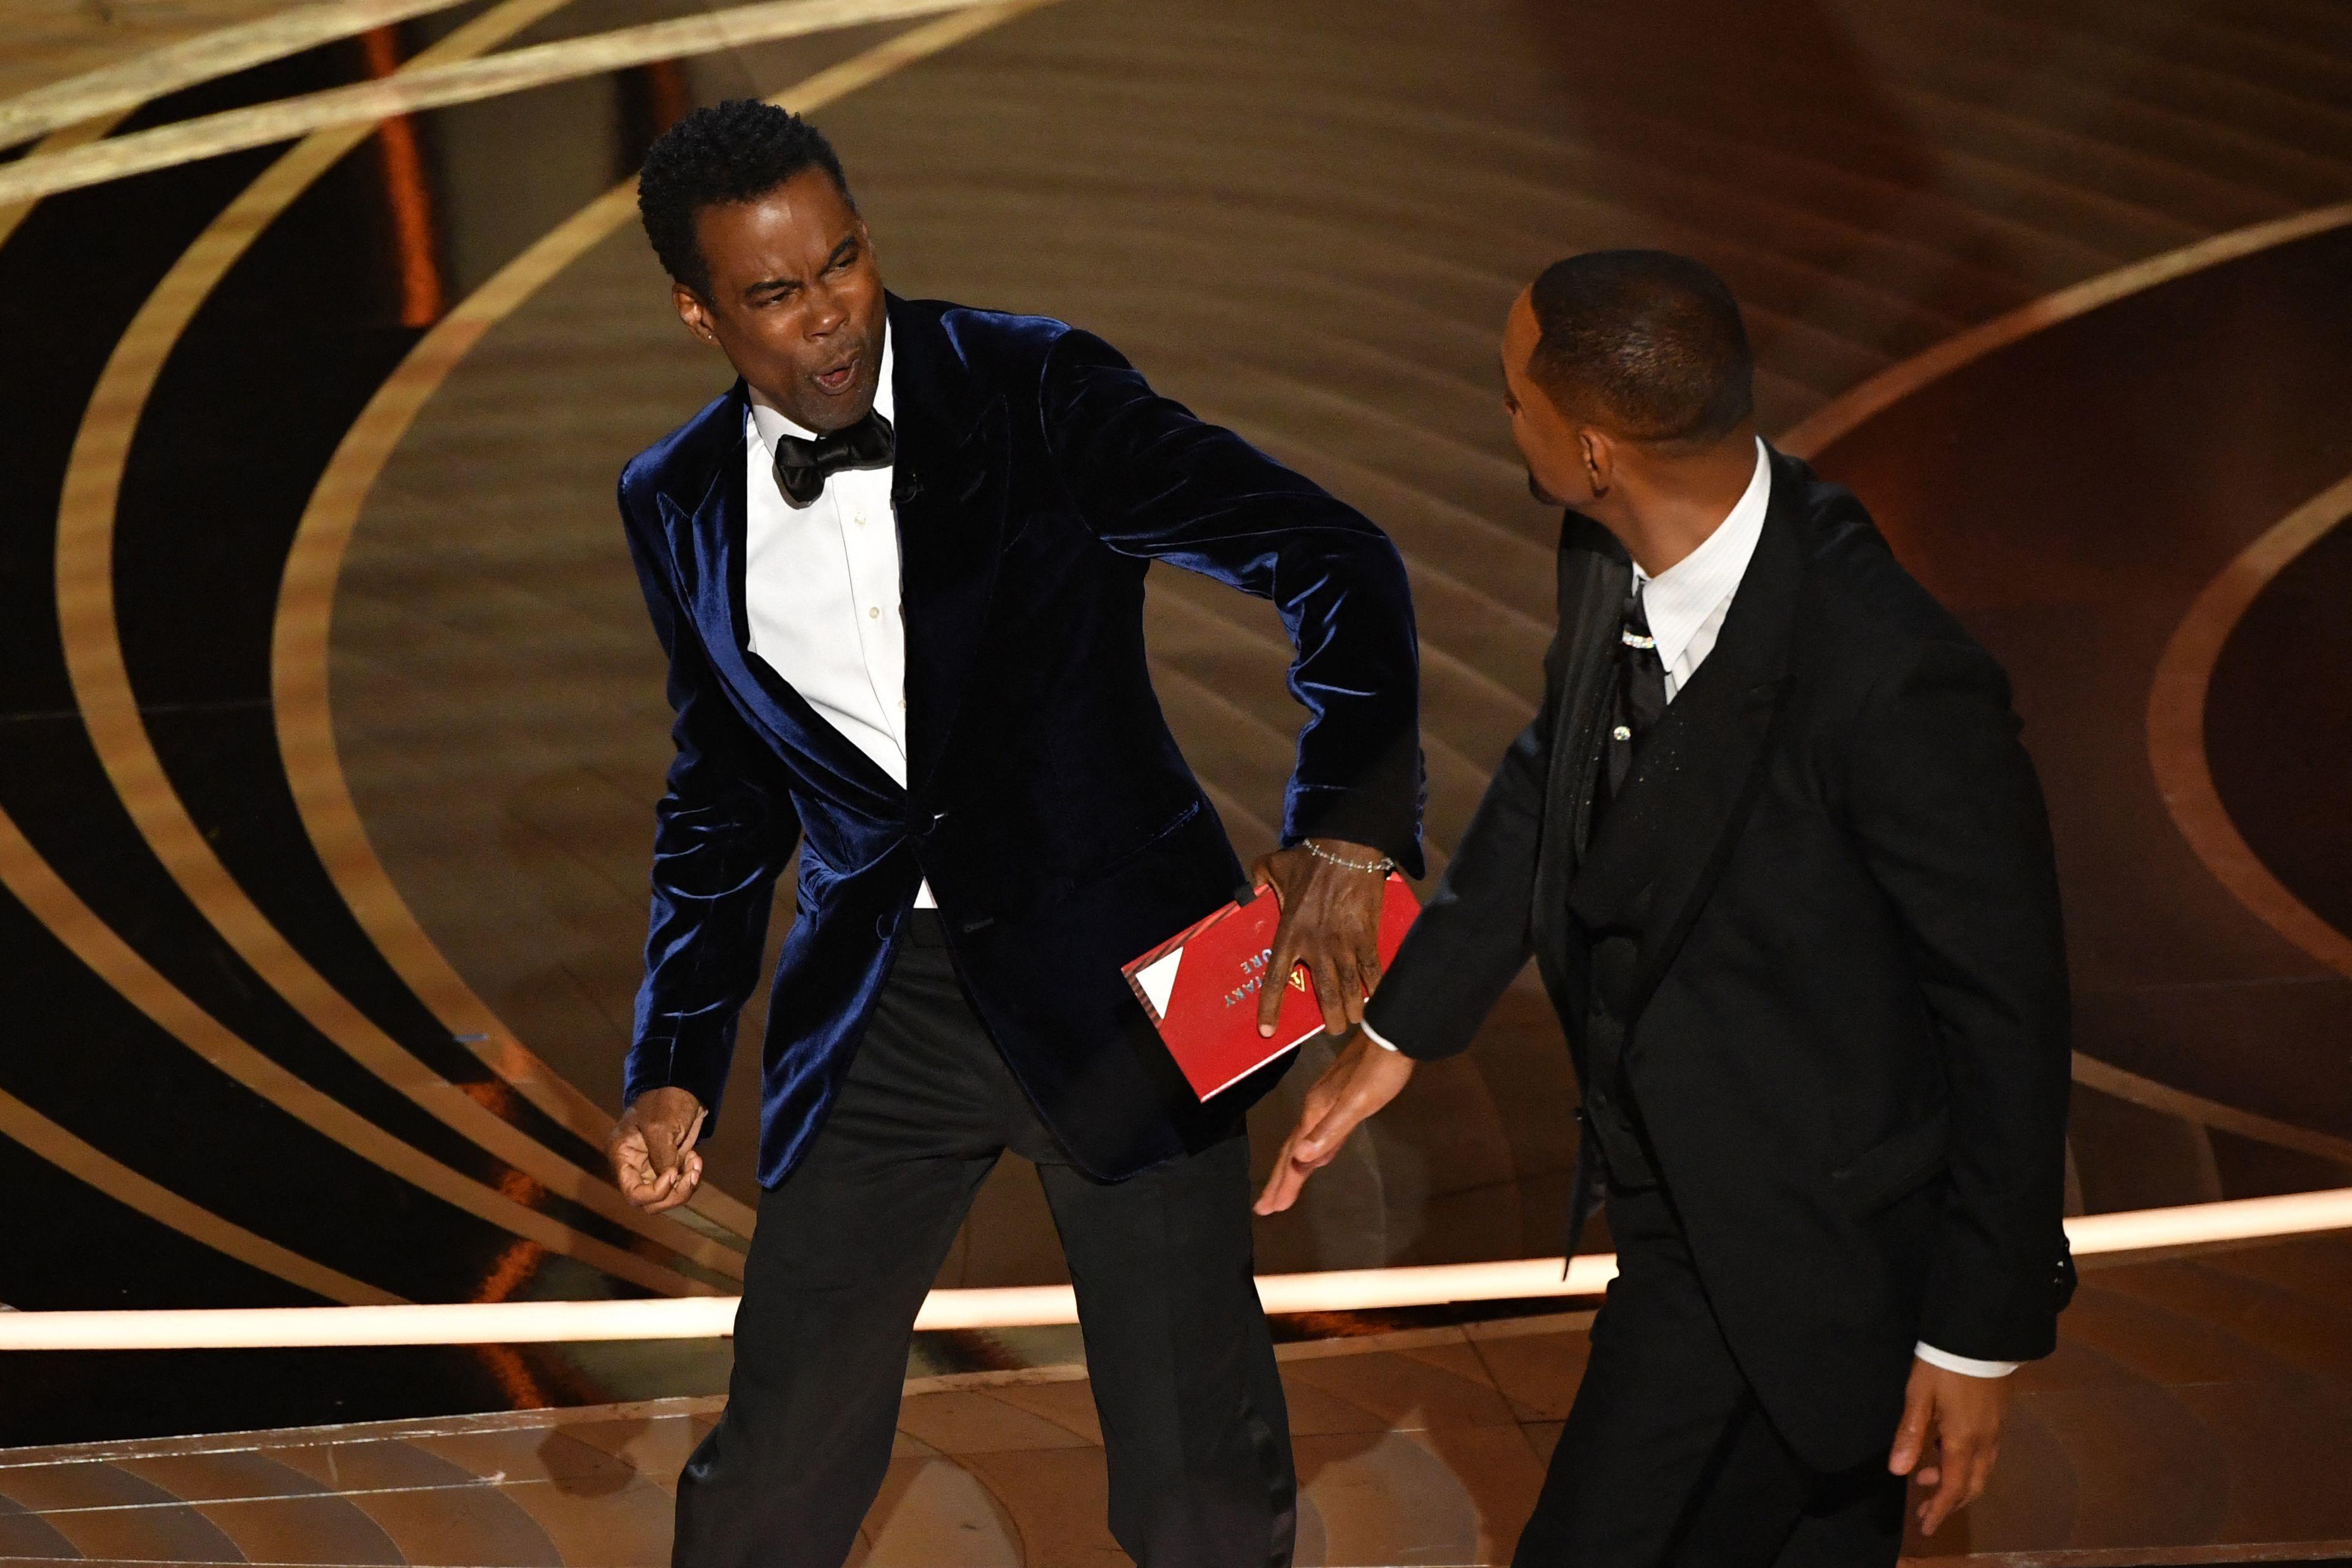 Will Smith and Chris Rock at the Academy Awards